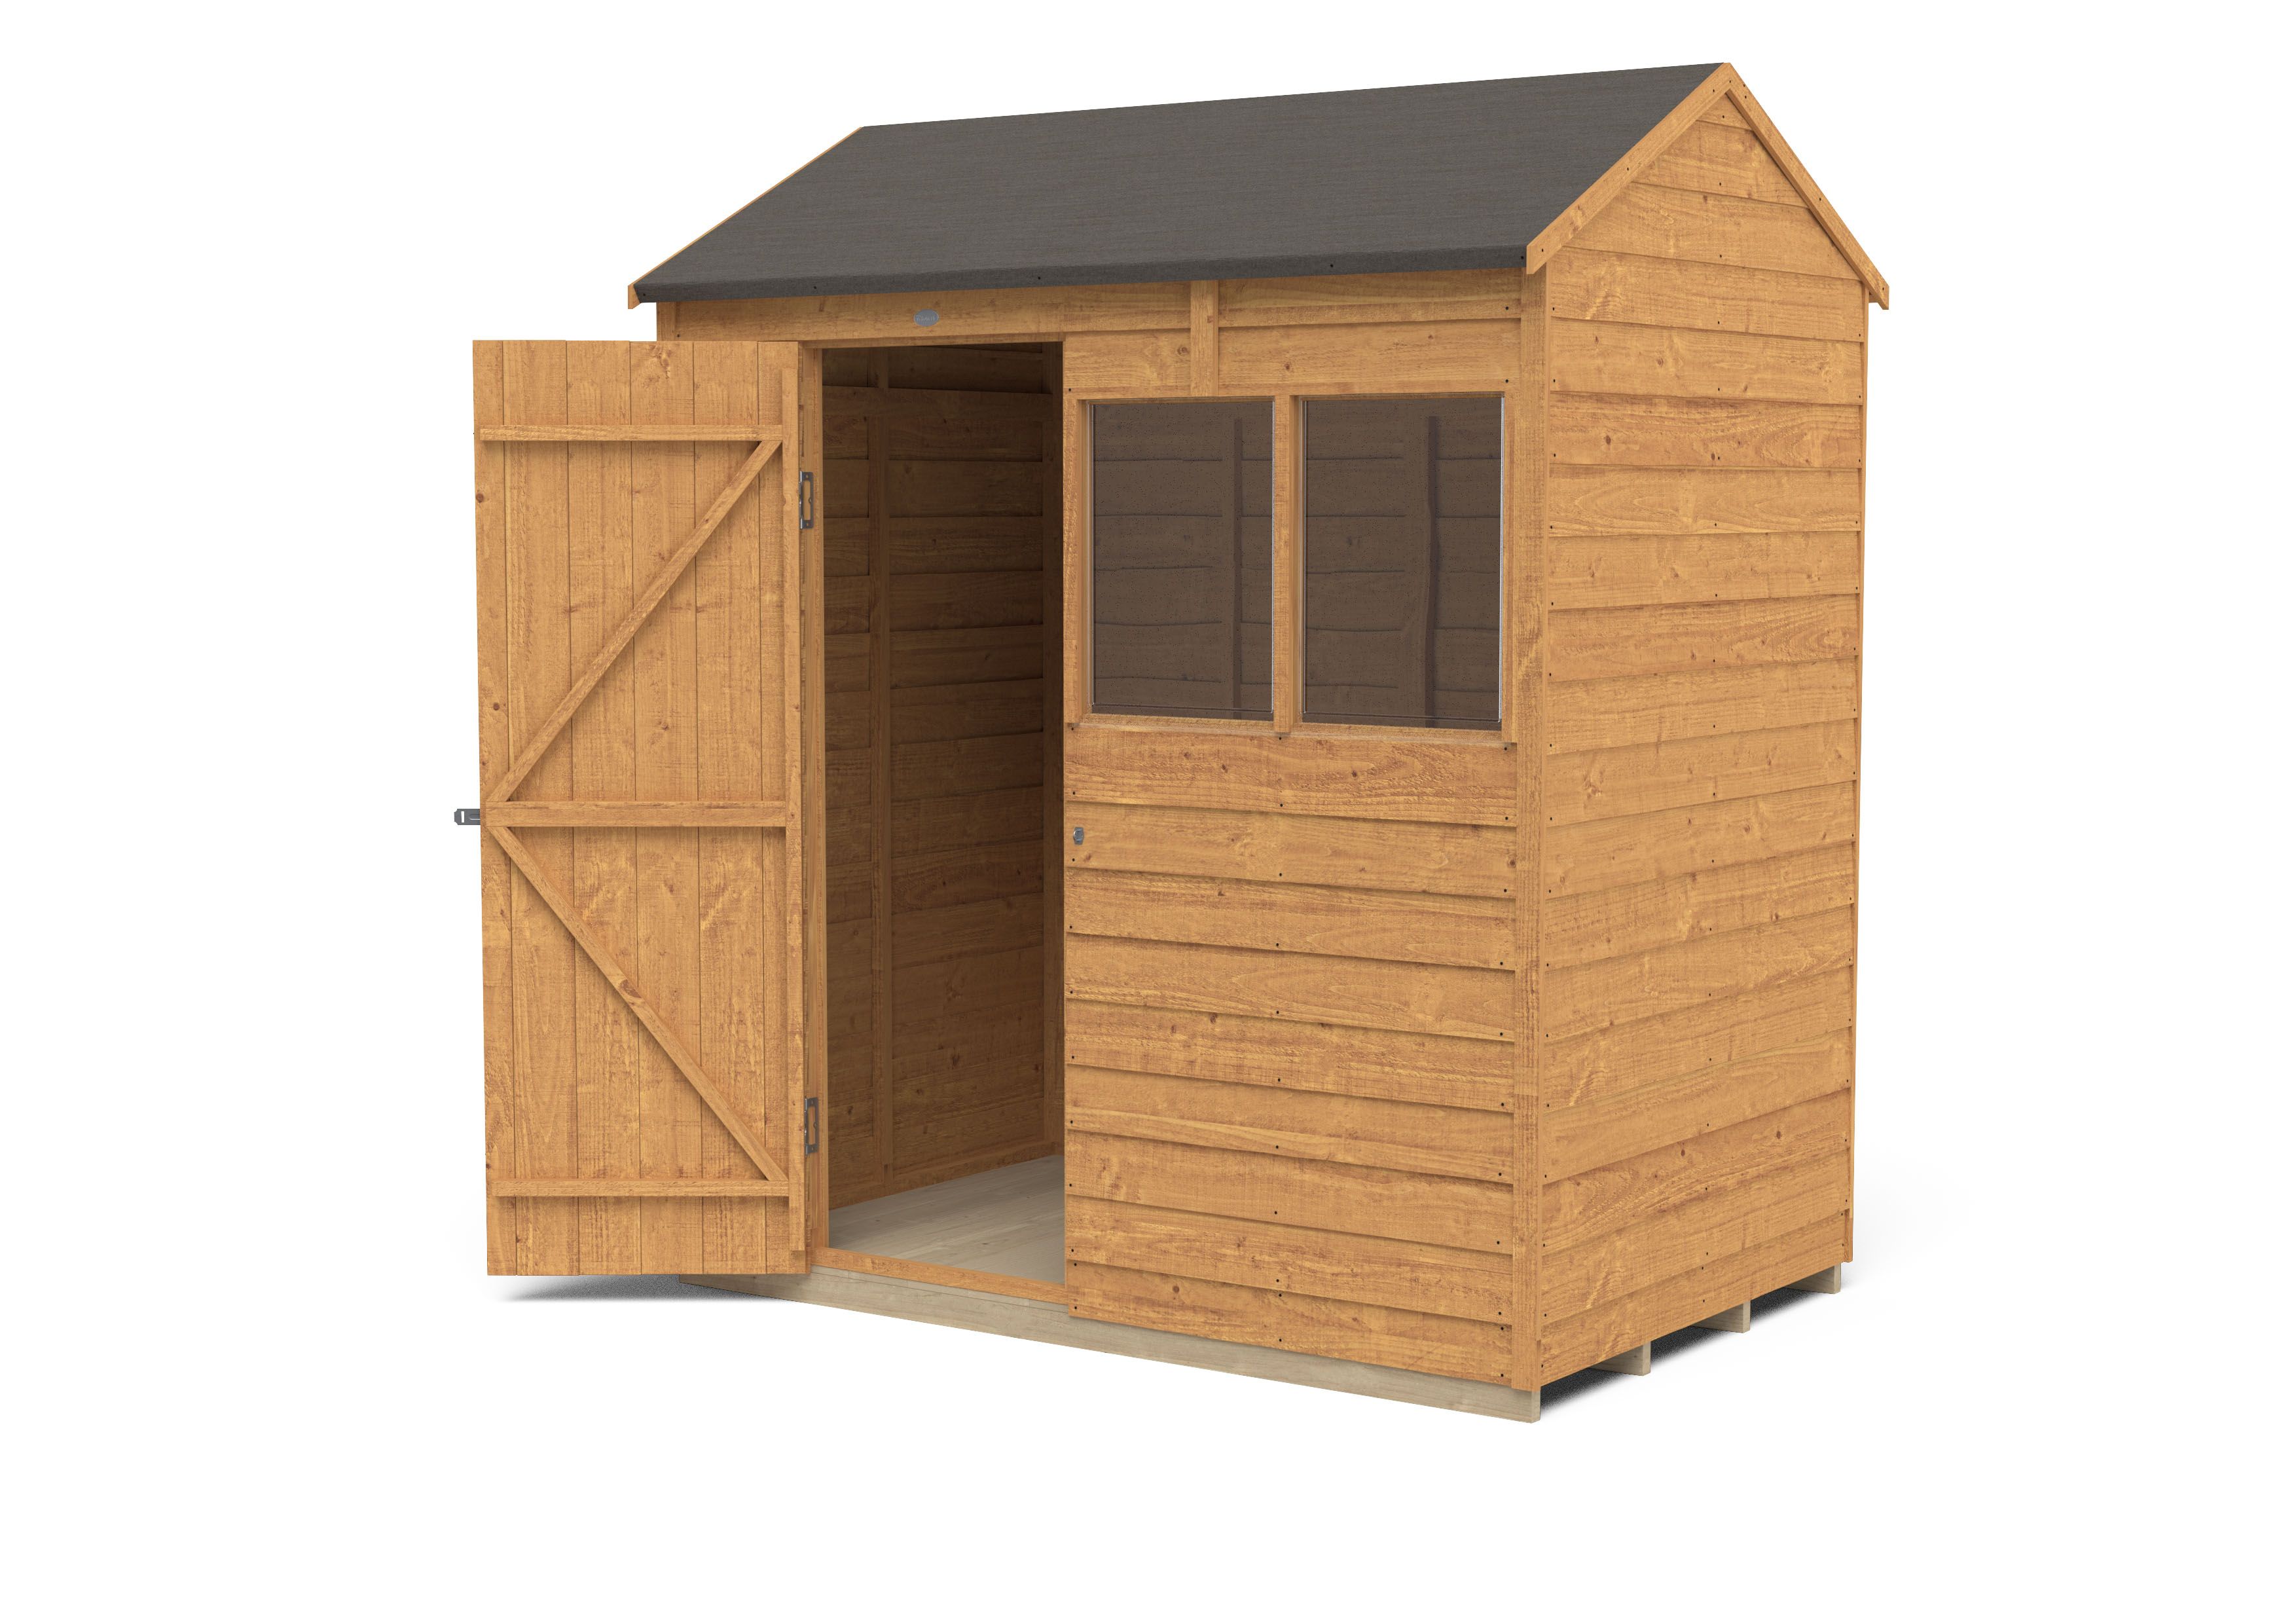 Forest Garden Overlap 6x4 ft Reverse apex Wooden Dip treated Shed with floor & 2 windows - Assembly service included